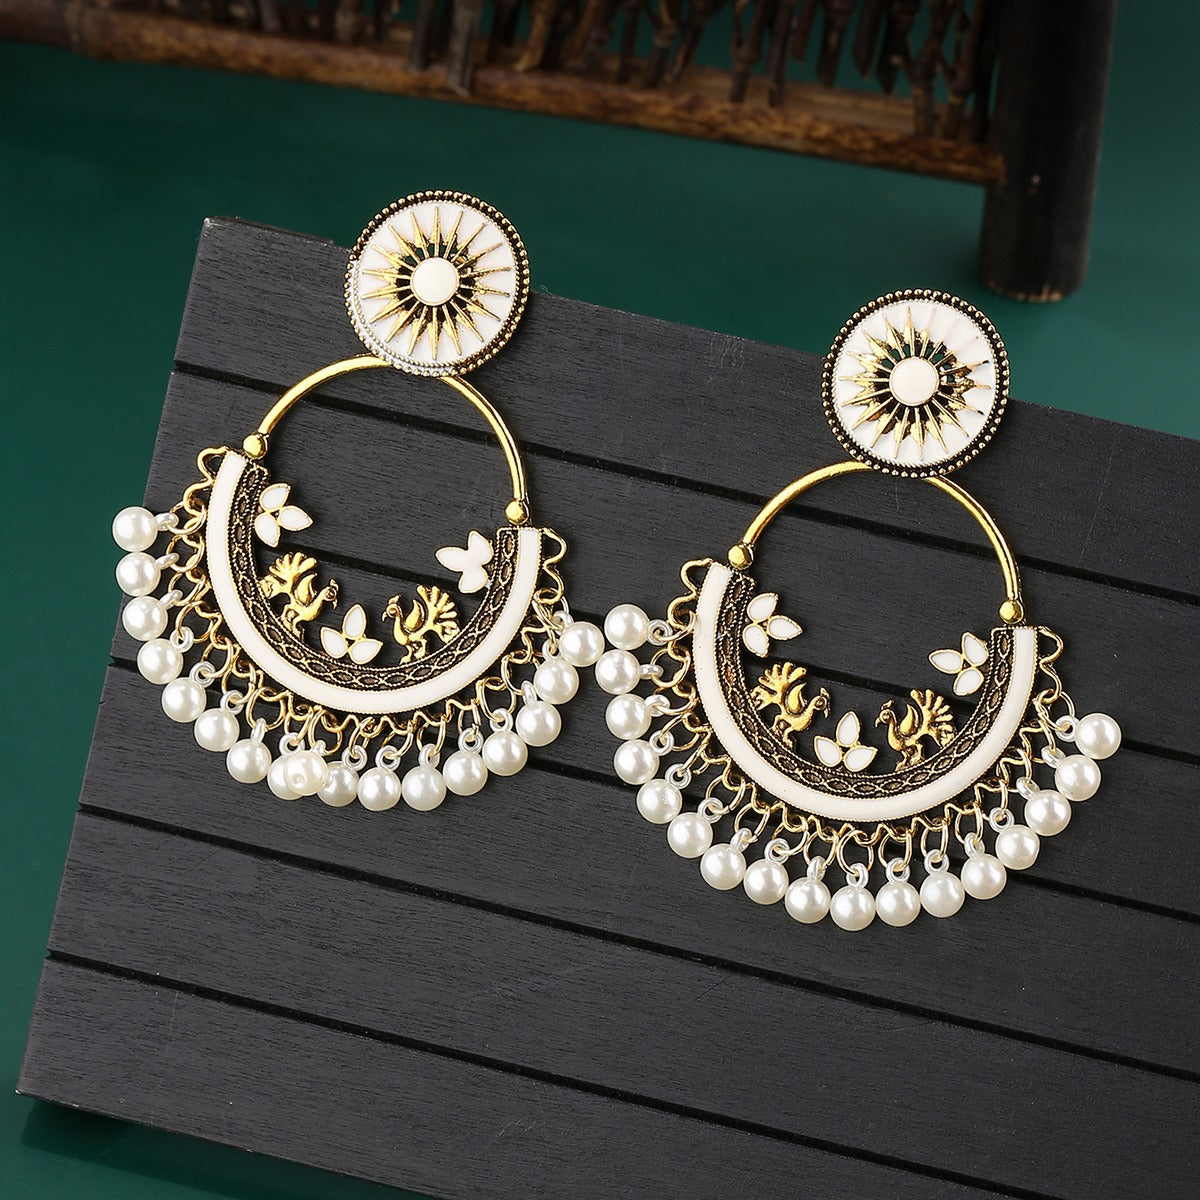 Moon alloy earrings jewelry exaggerated retro Indian style hollowed out bell pendant design sense earrings jewelry